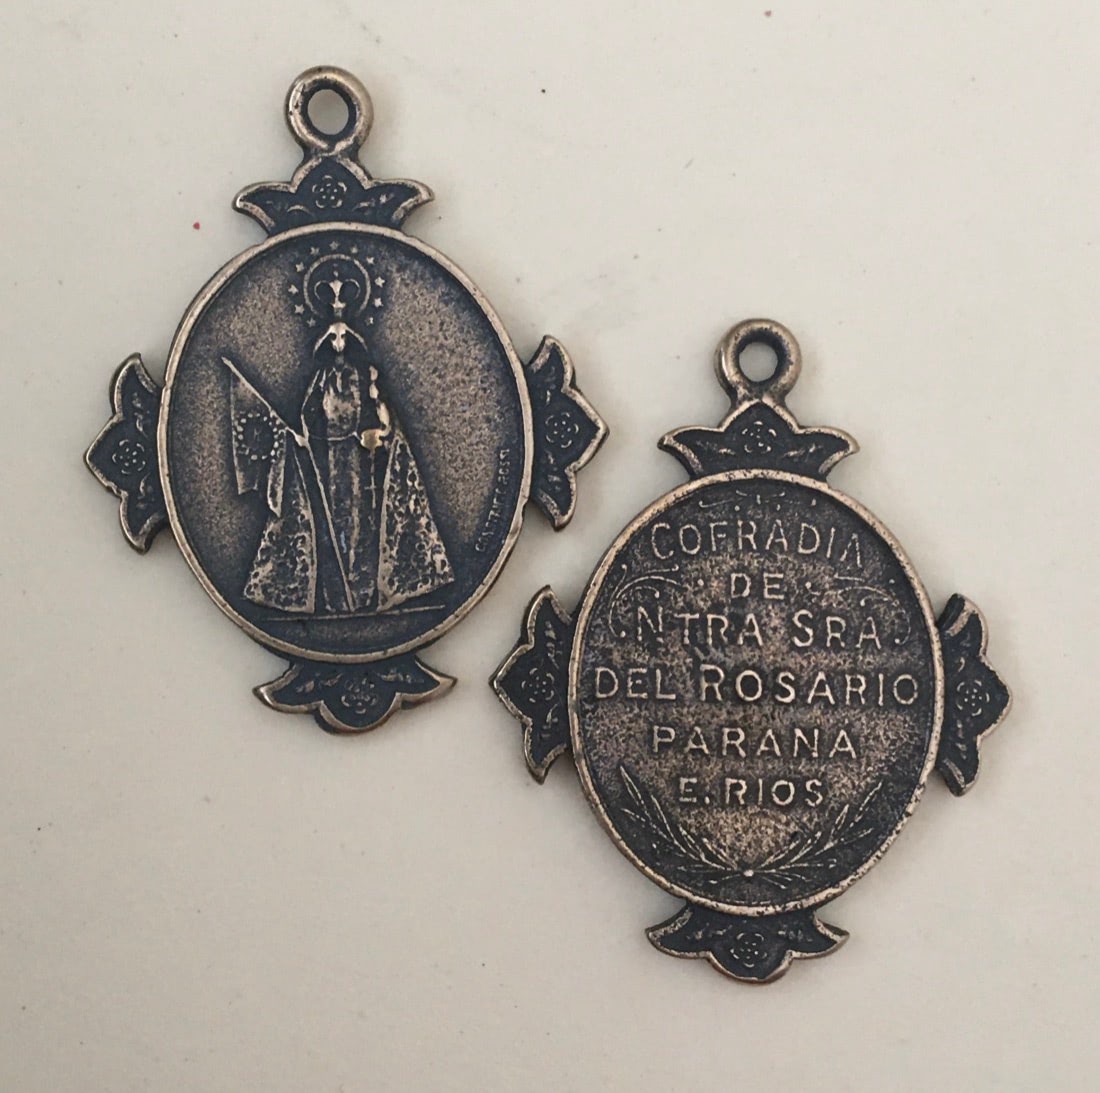 1006 - Medal - Our Lady of the Rosary